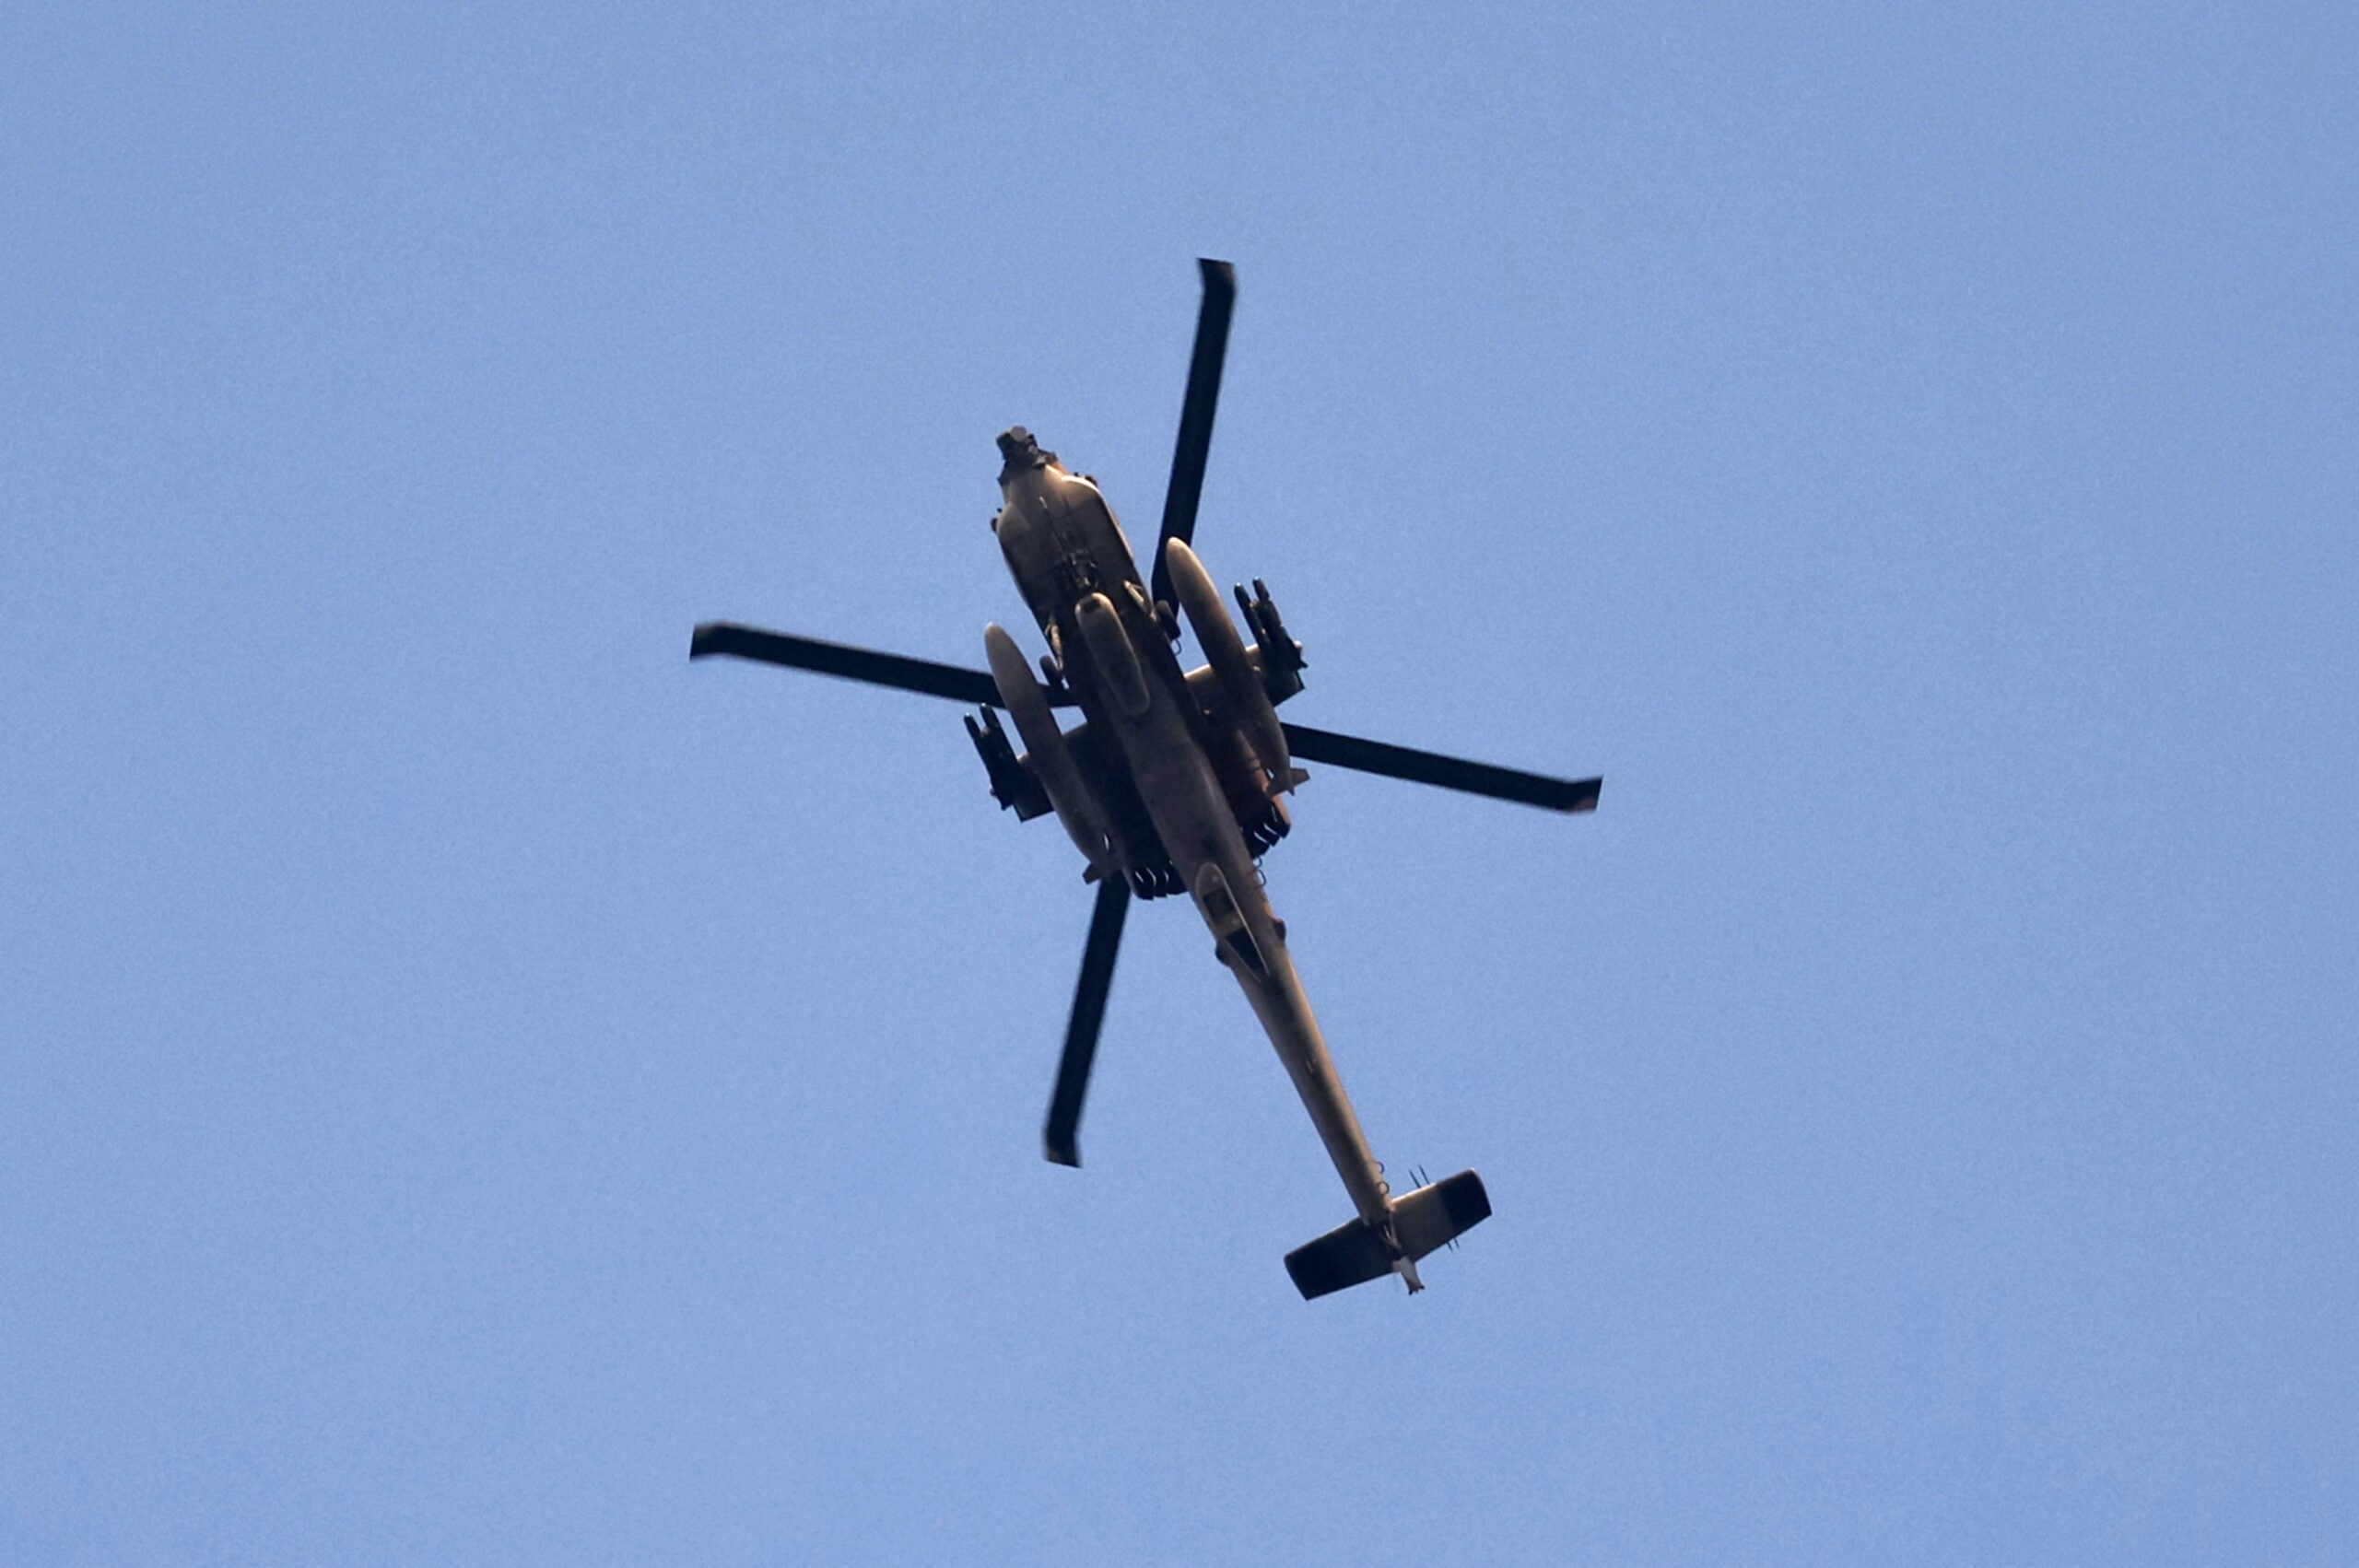 An Israeli Apache helicopter is pictured over the Israel's southern city of Ashkelon during an Israeli air strike on Gaza City, on August 5, 2022. - A senior militant from Islamic Jihad was killed in an Israeli air strike on the Gaza Strip today, prompting the militant group to warn Israel has "started a war".
A child was among those killed in the strikes, the enclave's health ministry said, while Israel's military estimated 15 were dead. (Photo by JACK GUEZ / AFP) (Photo by JACK GUEZ/AFP via Getty Images)